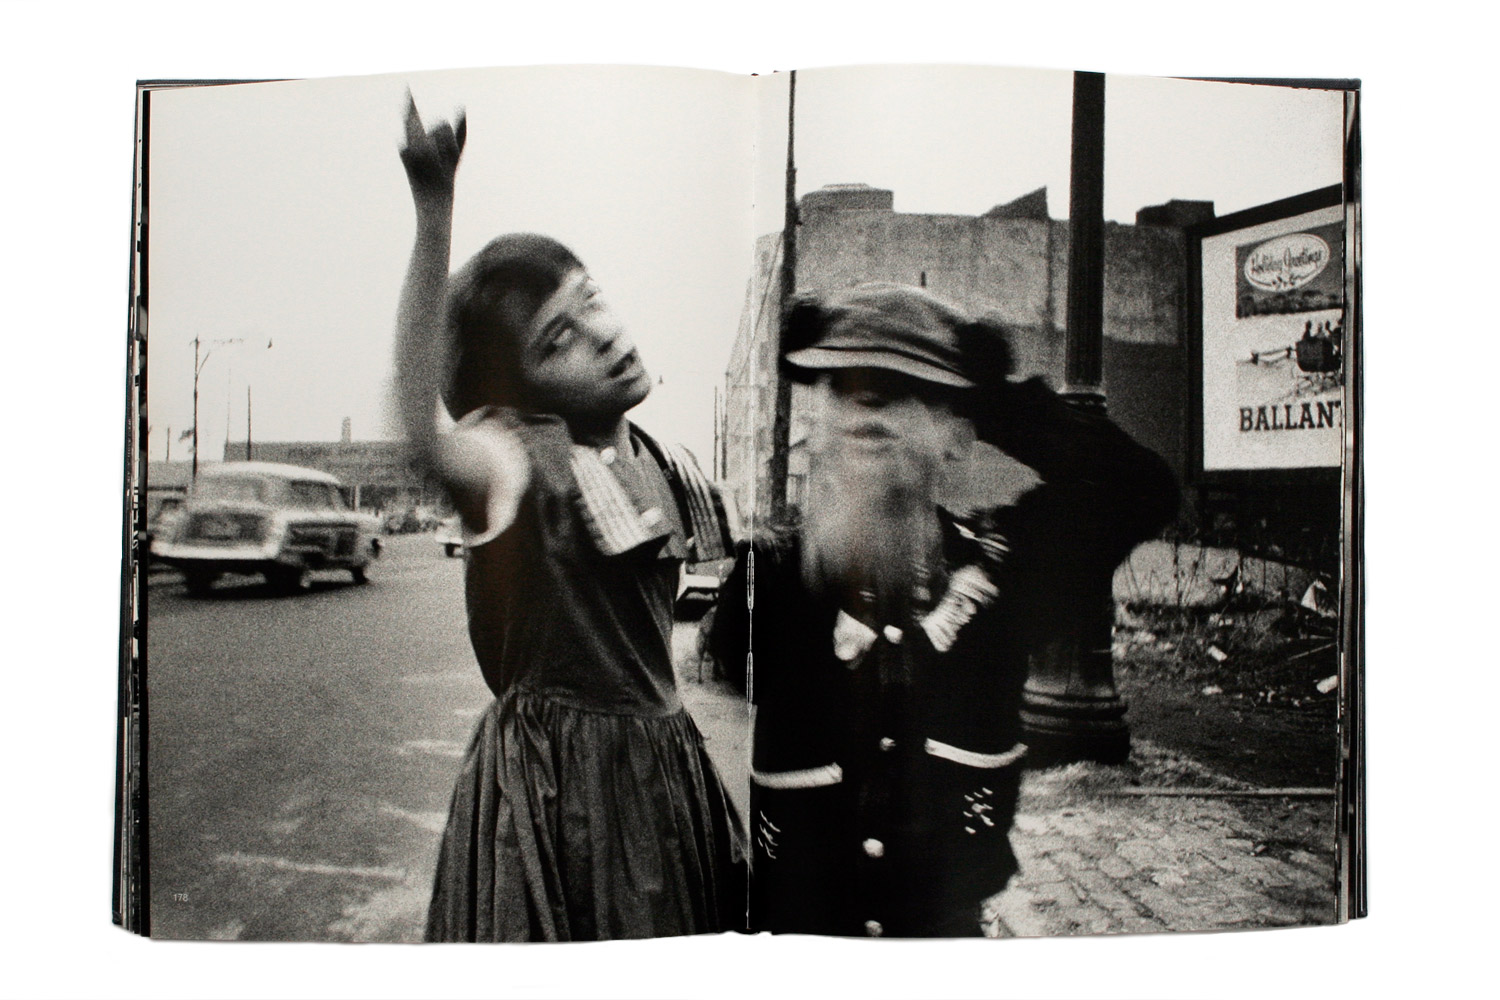 William Klein said of the two editions,  The first book was about graphic design. The second was about the photography.  Whether you agree or not, the resistance to repetition is apparent.